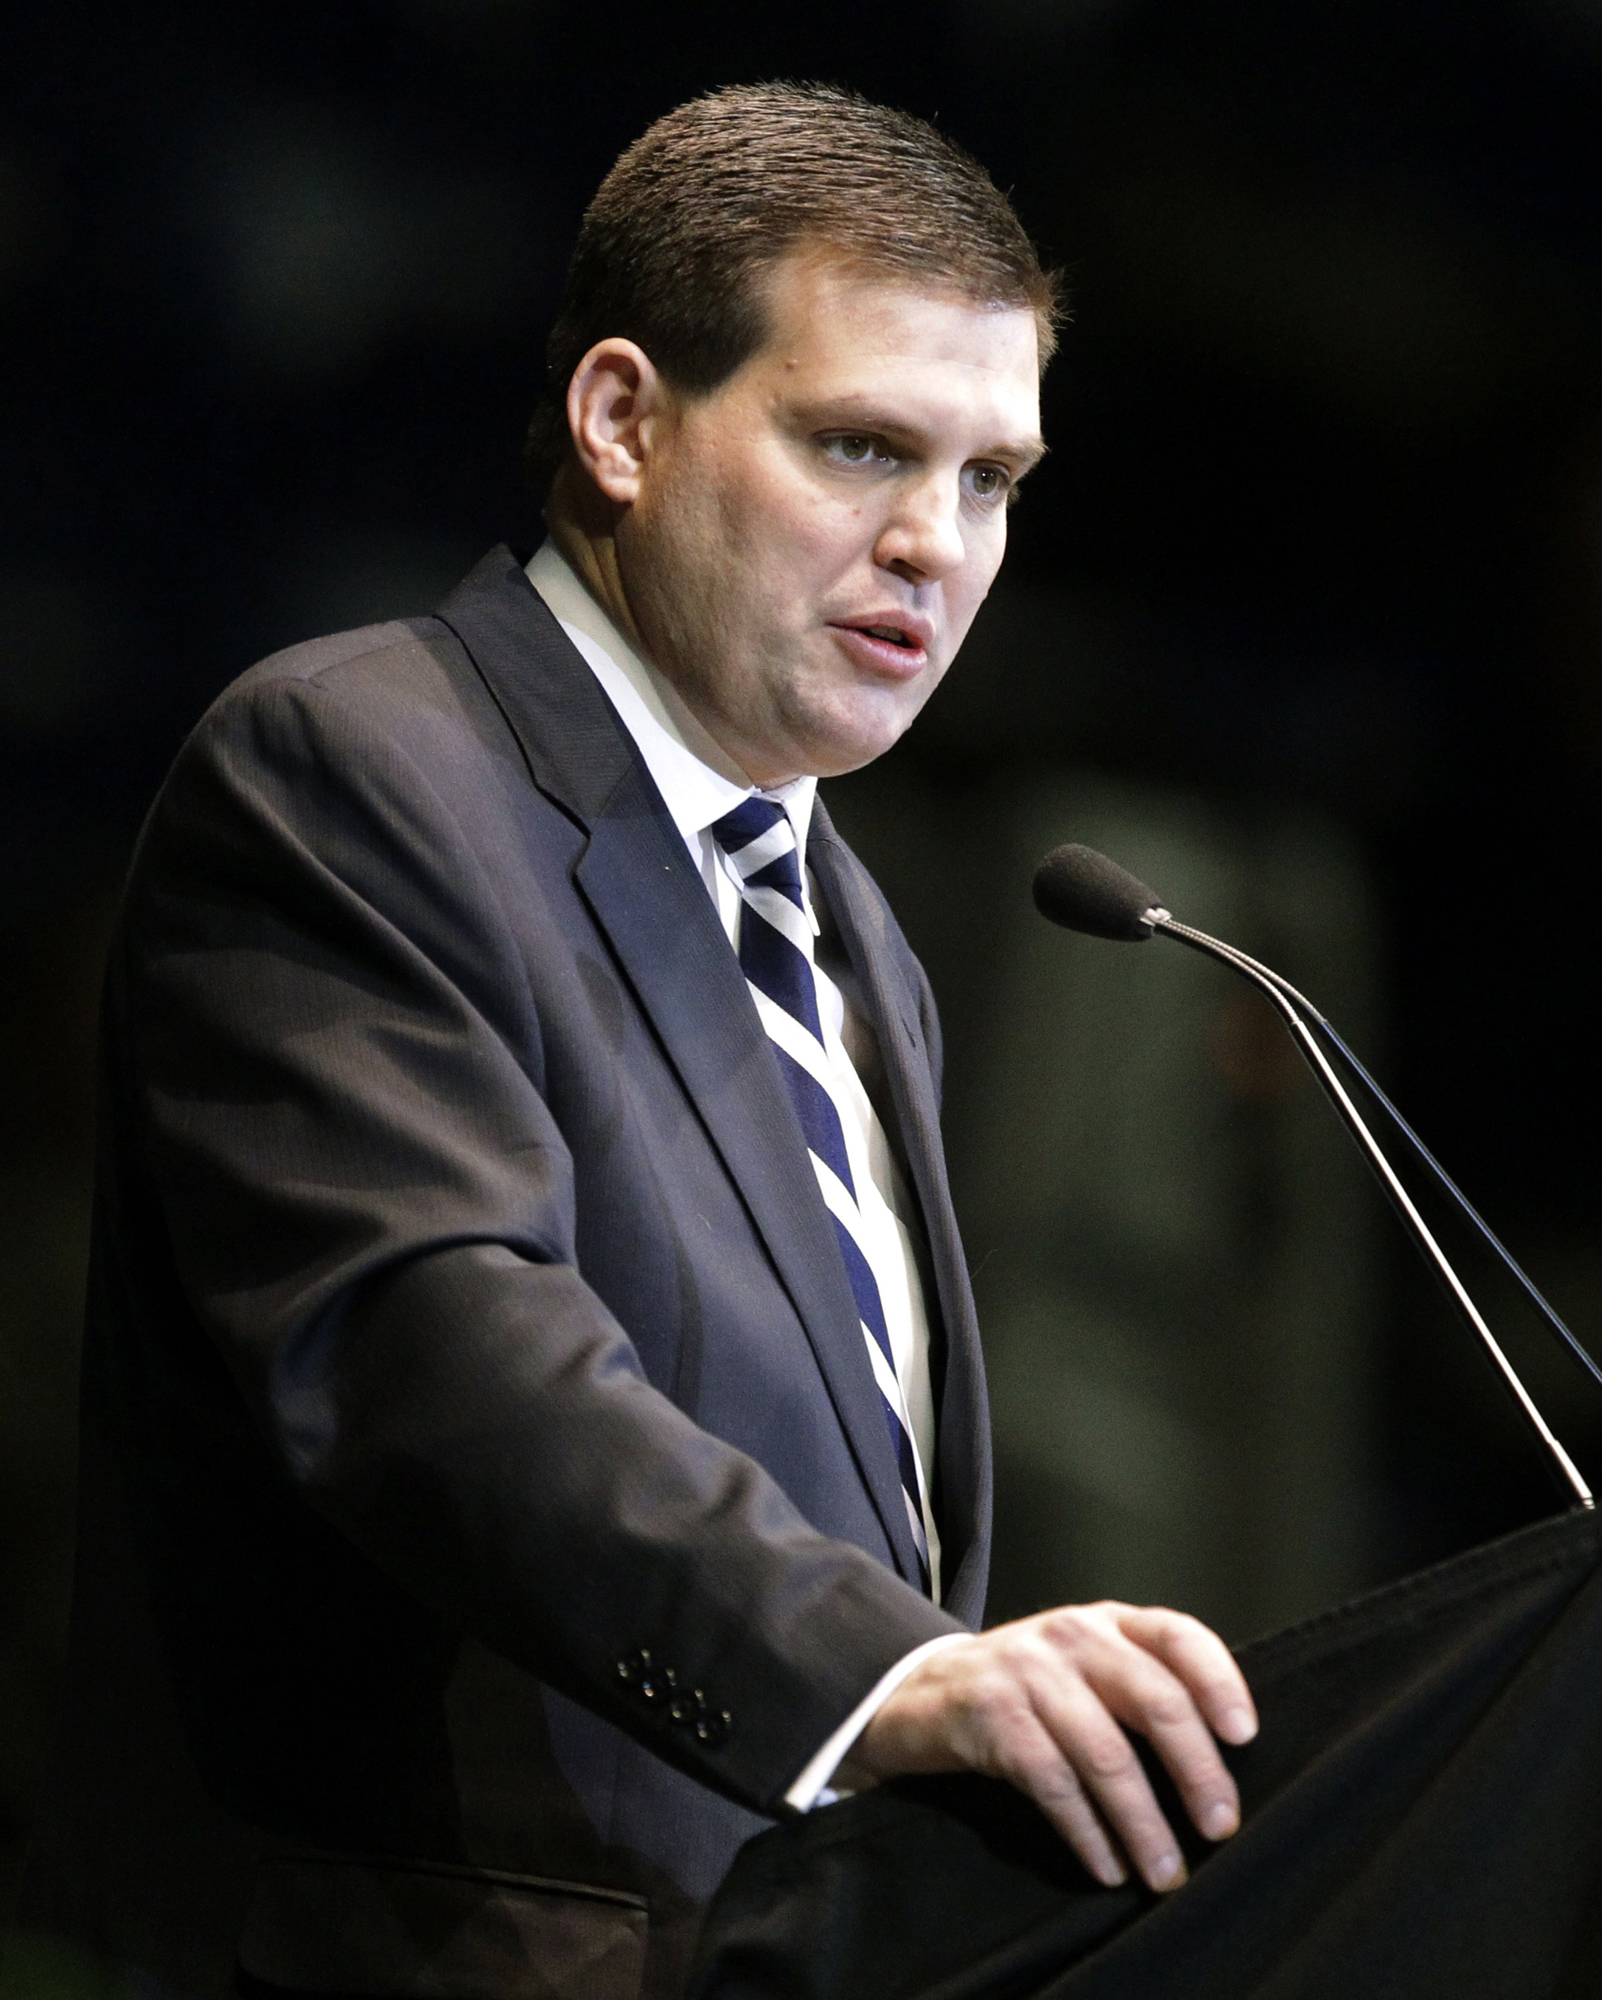 Jay Paterno, son of former Penn State football head coach Joe Paterno, speaks during a memorial service for his father in State College, Pa., in 2012.